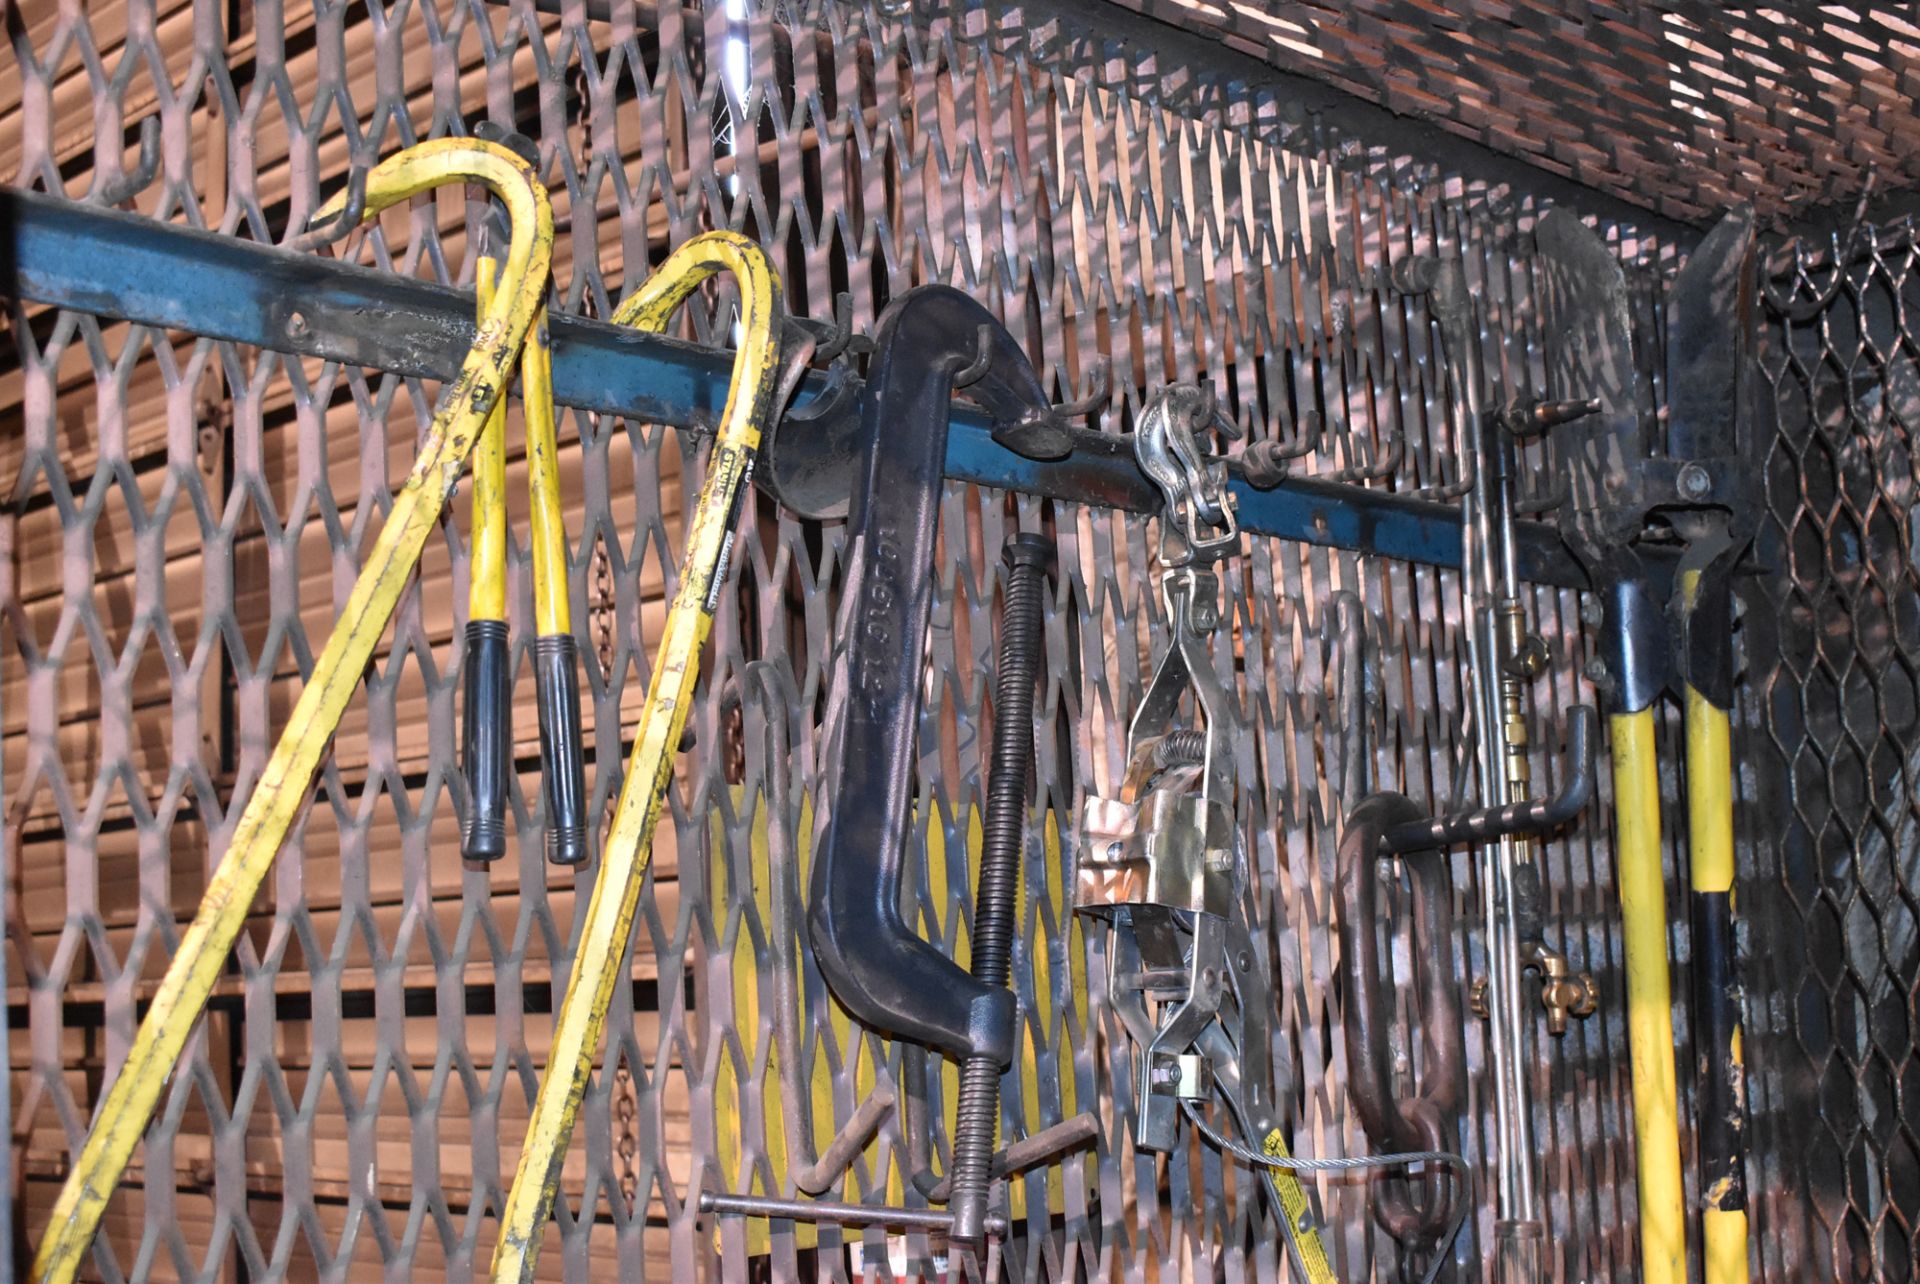 LOT/ CONTENTS OF CAGE CONSISTING OF LIFTING ATTACHMENTS, TOOLS, TORCH CADDIES - Image 3 of 4